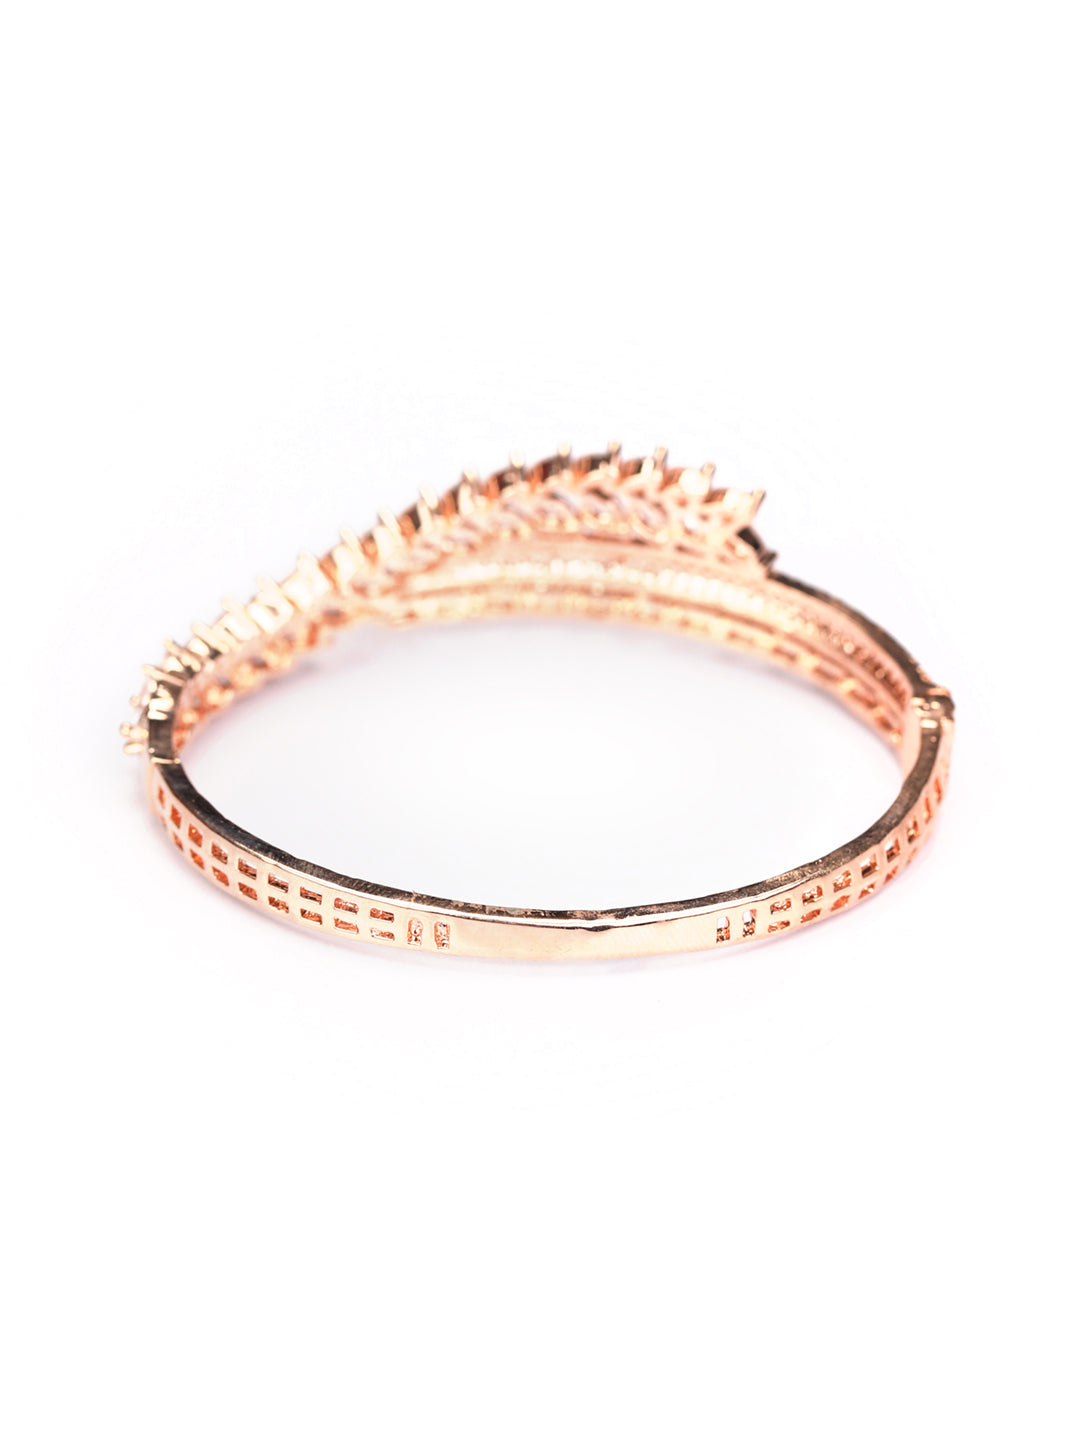 Priyaasi Rose GoldPlated Handcrafted American Diamond Studded Bangle Style  Bracelet Buy Priyaasi Rose GoldPlated Handcrafted American Diamond  Studded Bangle Style Bracelet Online at Best Price in India  Nykaa